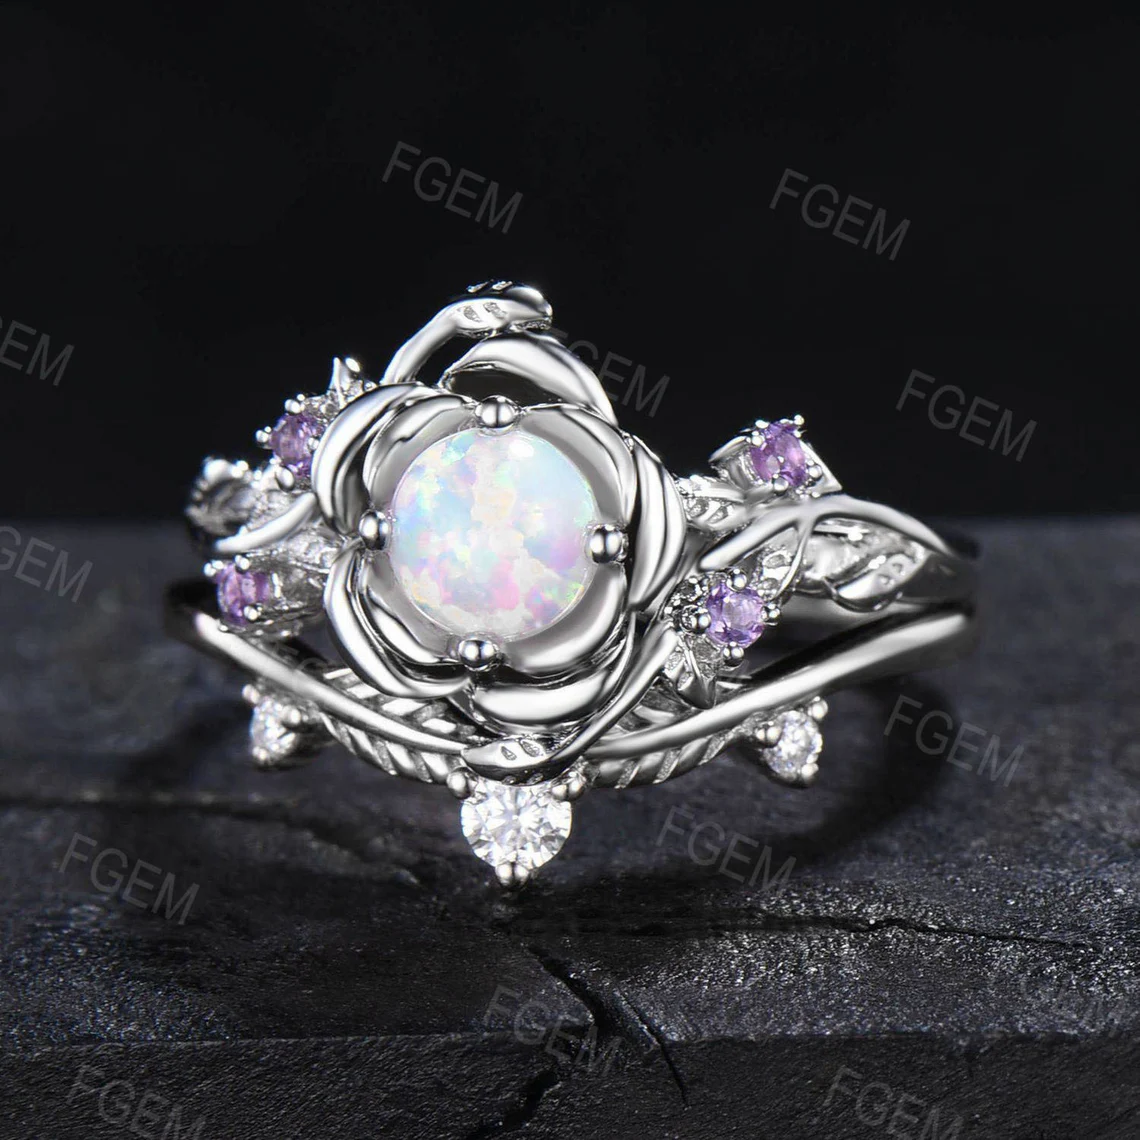 Rose Flower Opal Engagement Ring Set 5mm Round Cut White Opal Floral Wedding Ring Nature Inspired Leaf Amethyst Ring October Birthstone Gift